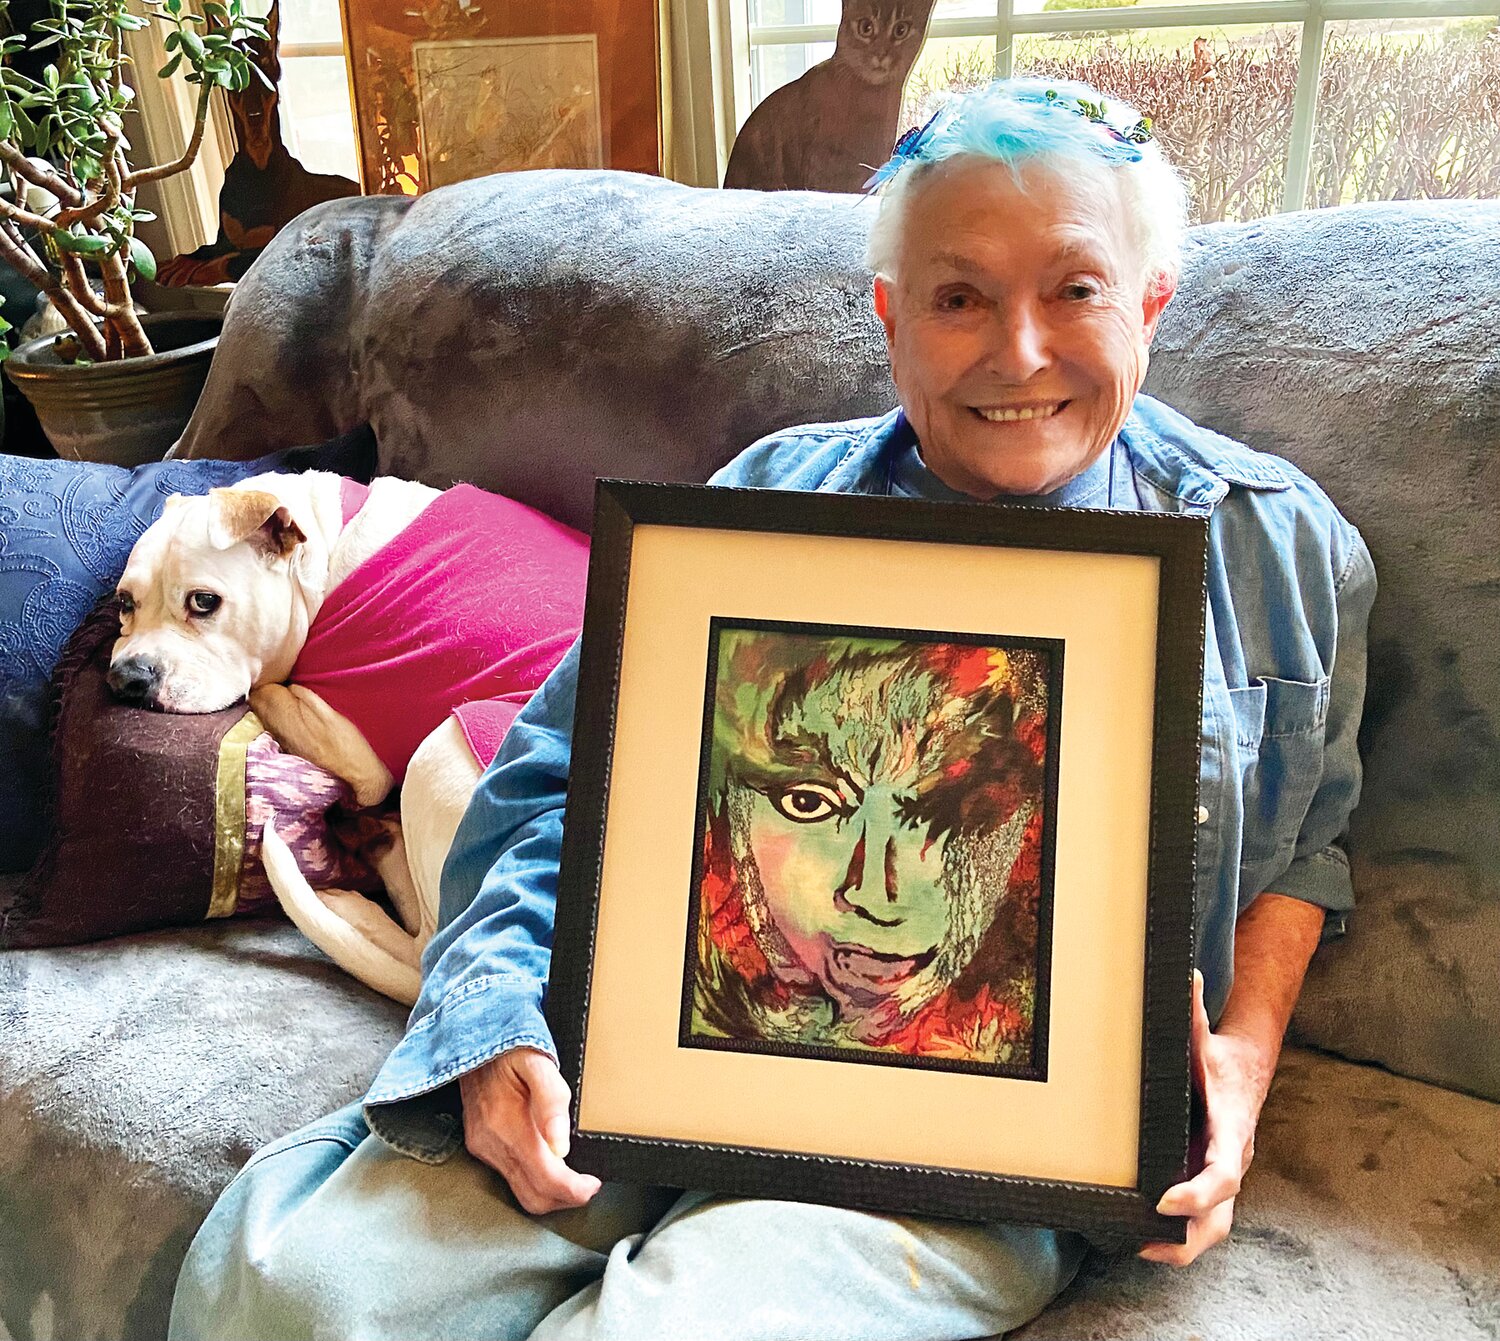 Gail Selesnick Fisher, 88, with her dog, Sal-lee, will exhibit her artwork at the Green Building Center in Lambertville, N.J., along with photography by Stephen Harris. A “Meet the Artist’”reception will take place from 5-8 p.m. Saturday, April 13.